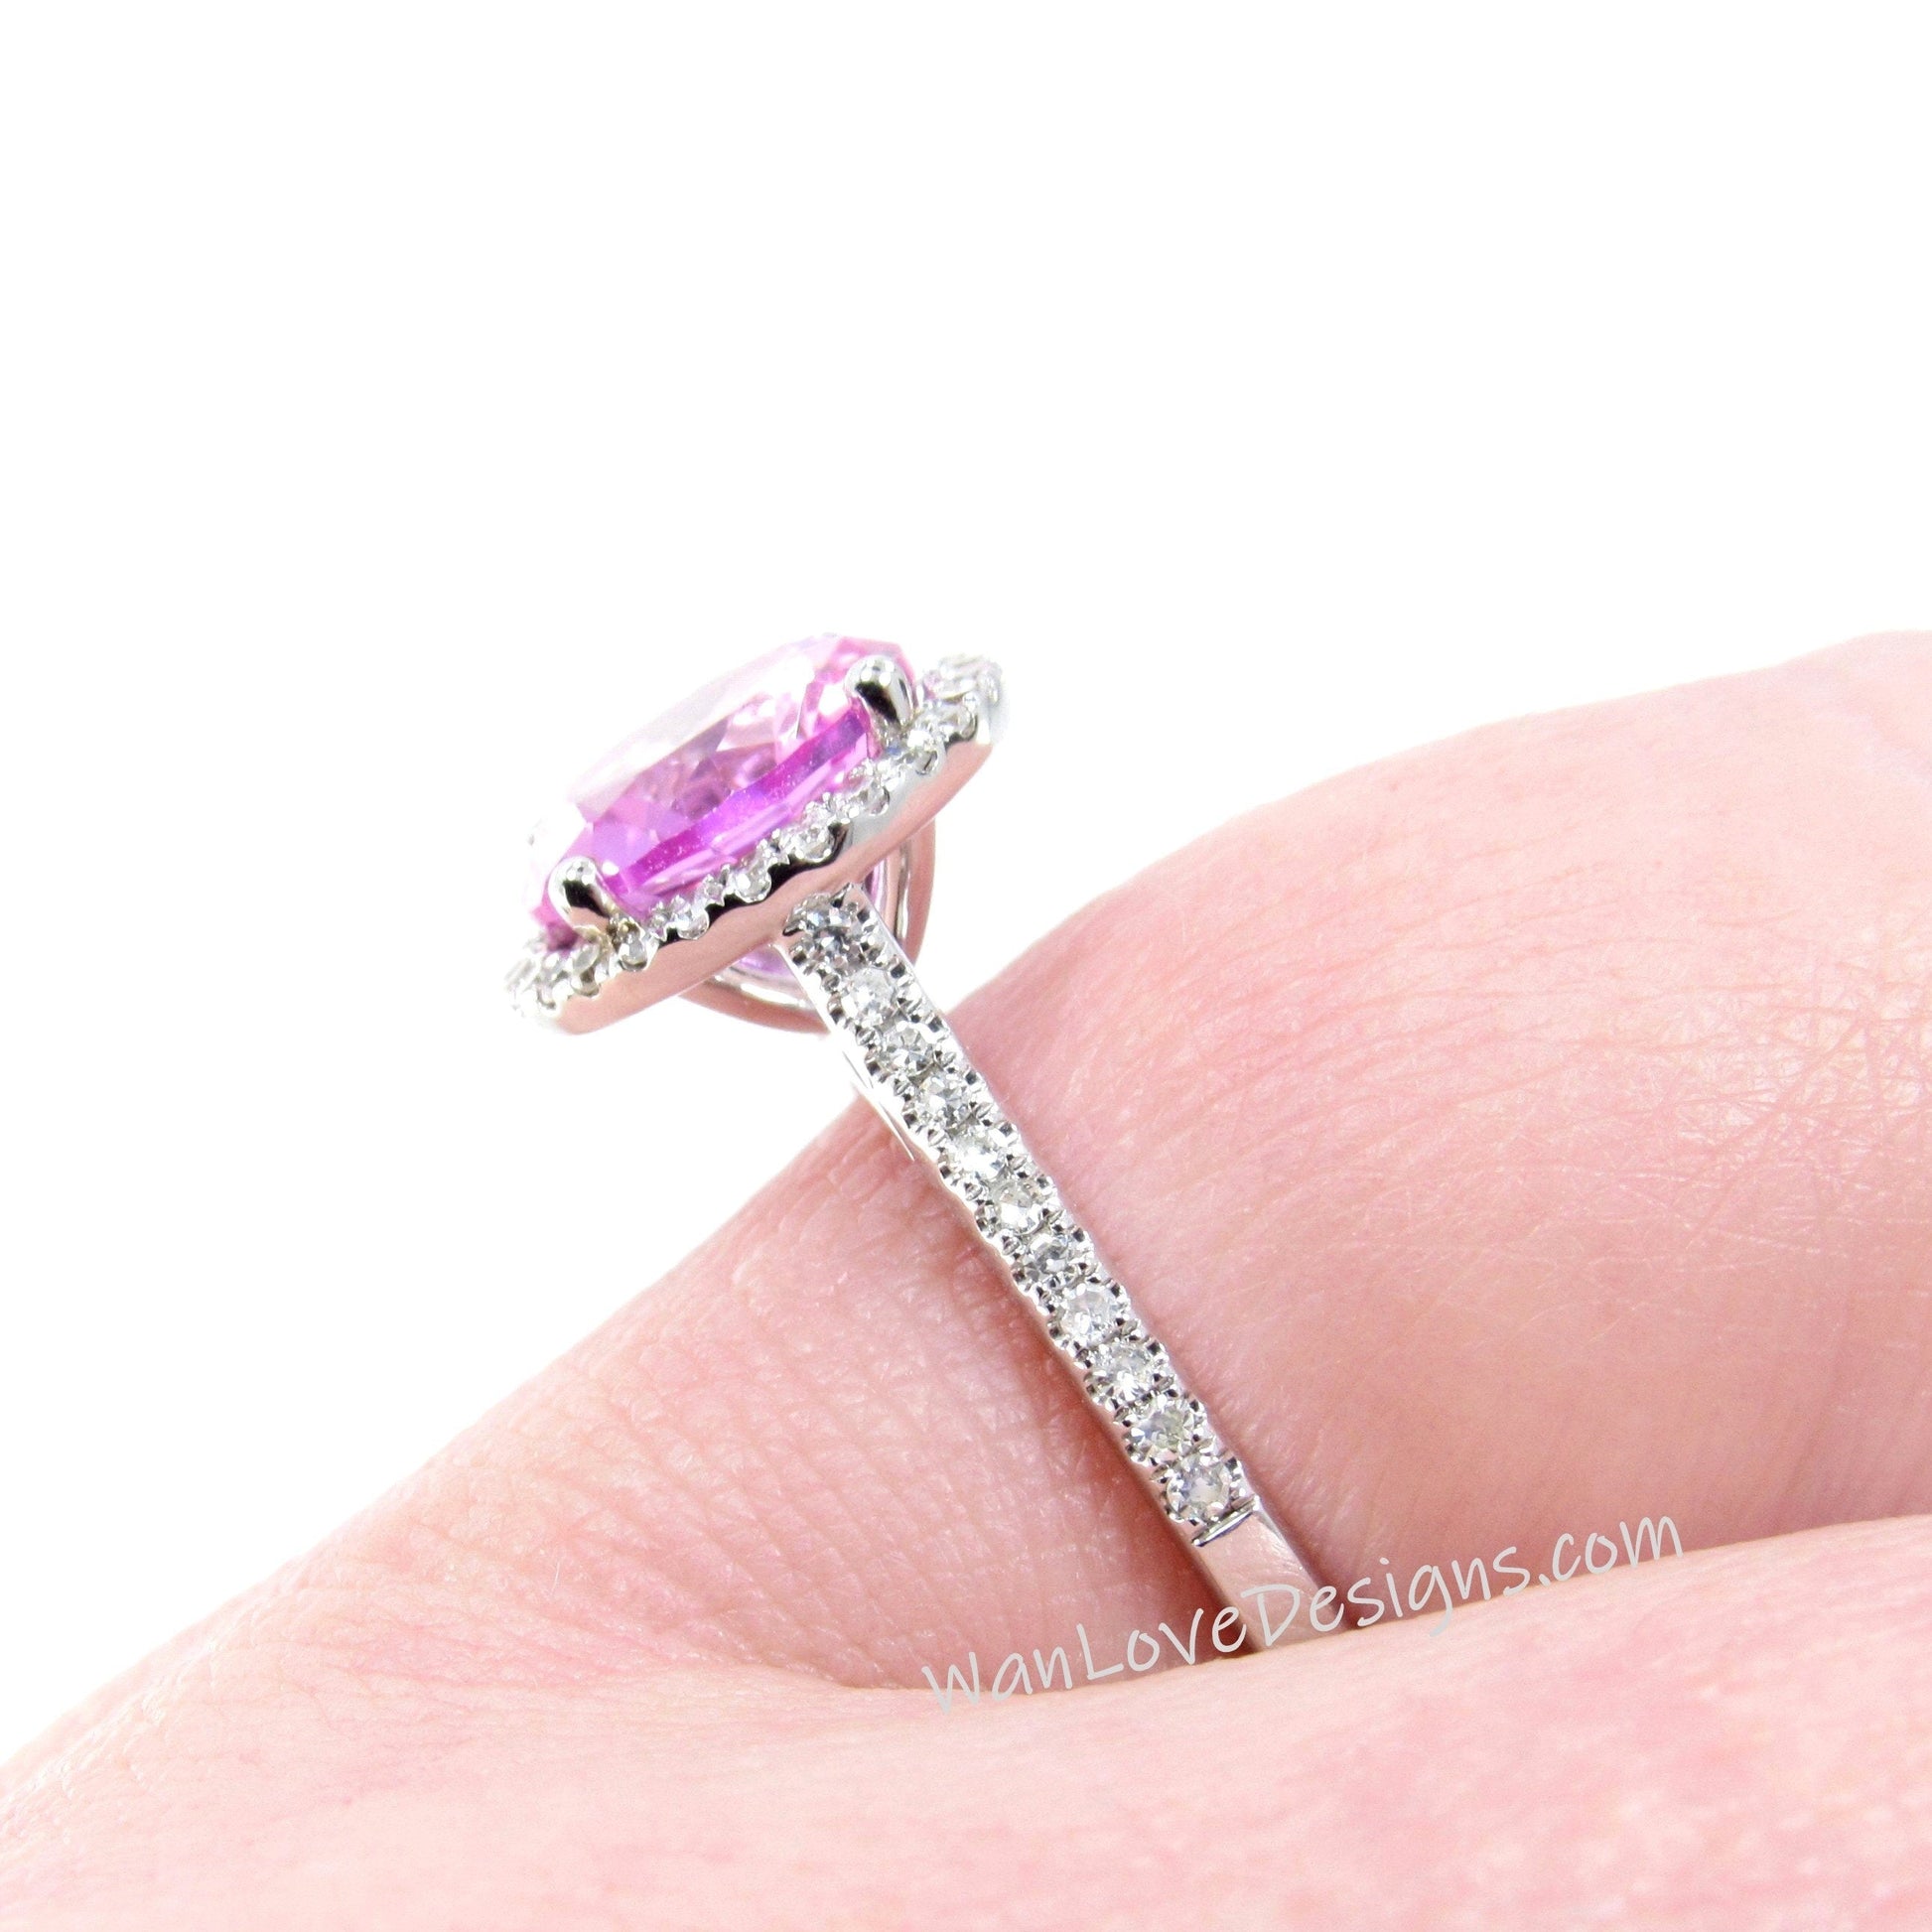 Pink Sapphire & Diamonds Round Halo Cathedral Engagement Ring, 2ct 8mm, White Gold, Wedding, Anniversary Gift, Ready to ship Wan Love Designs